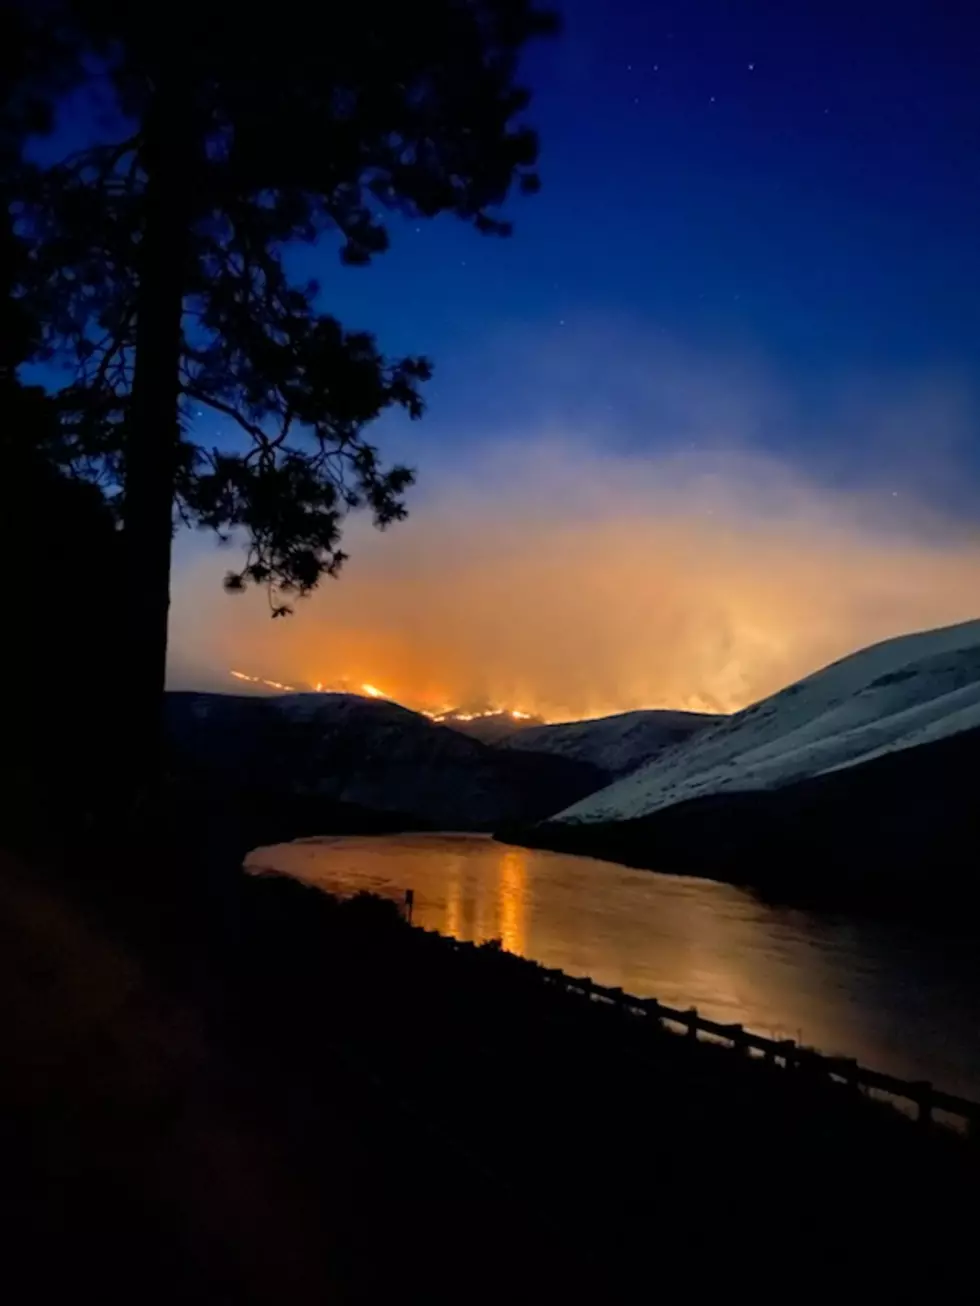 Evans Canyon Wildfire Has Torched 75,857 Acres, Winds Increasing